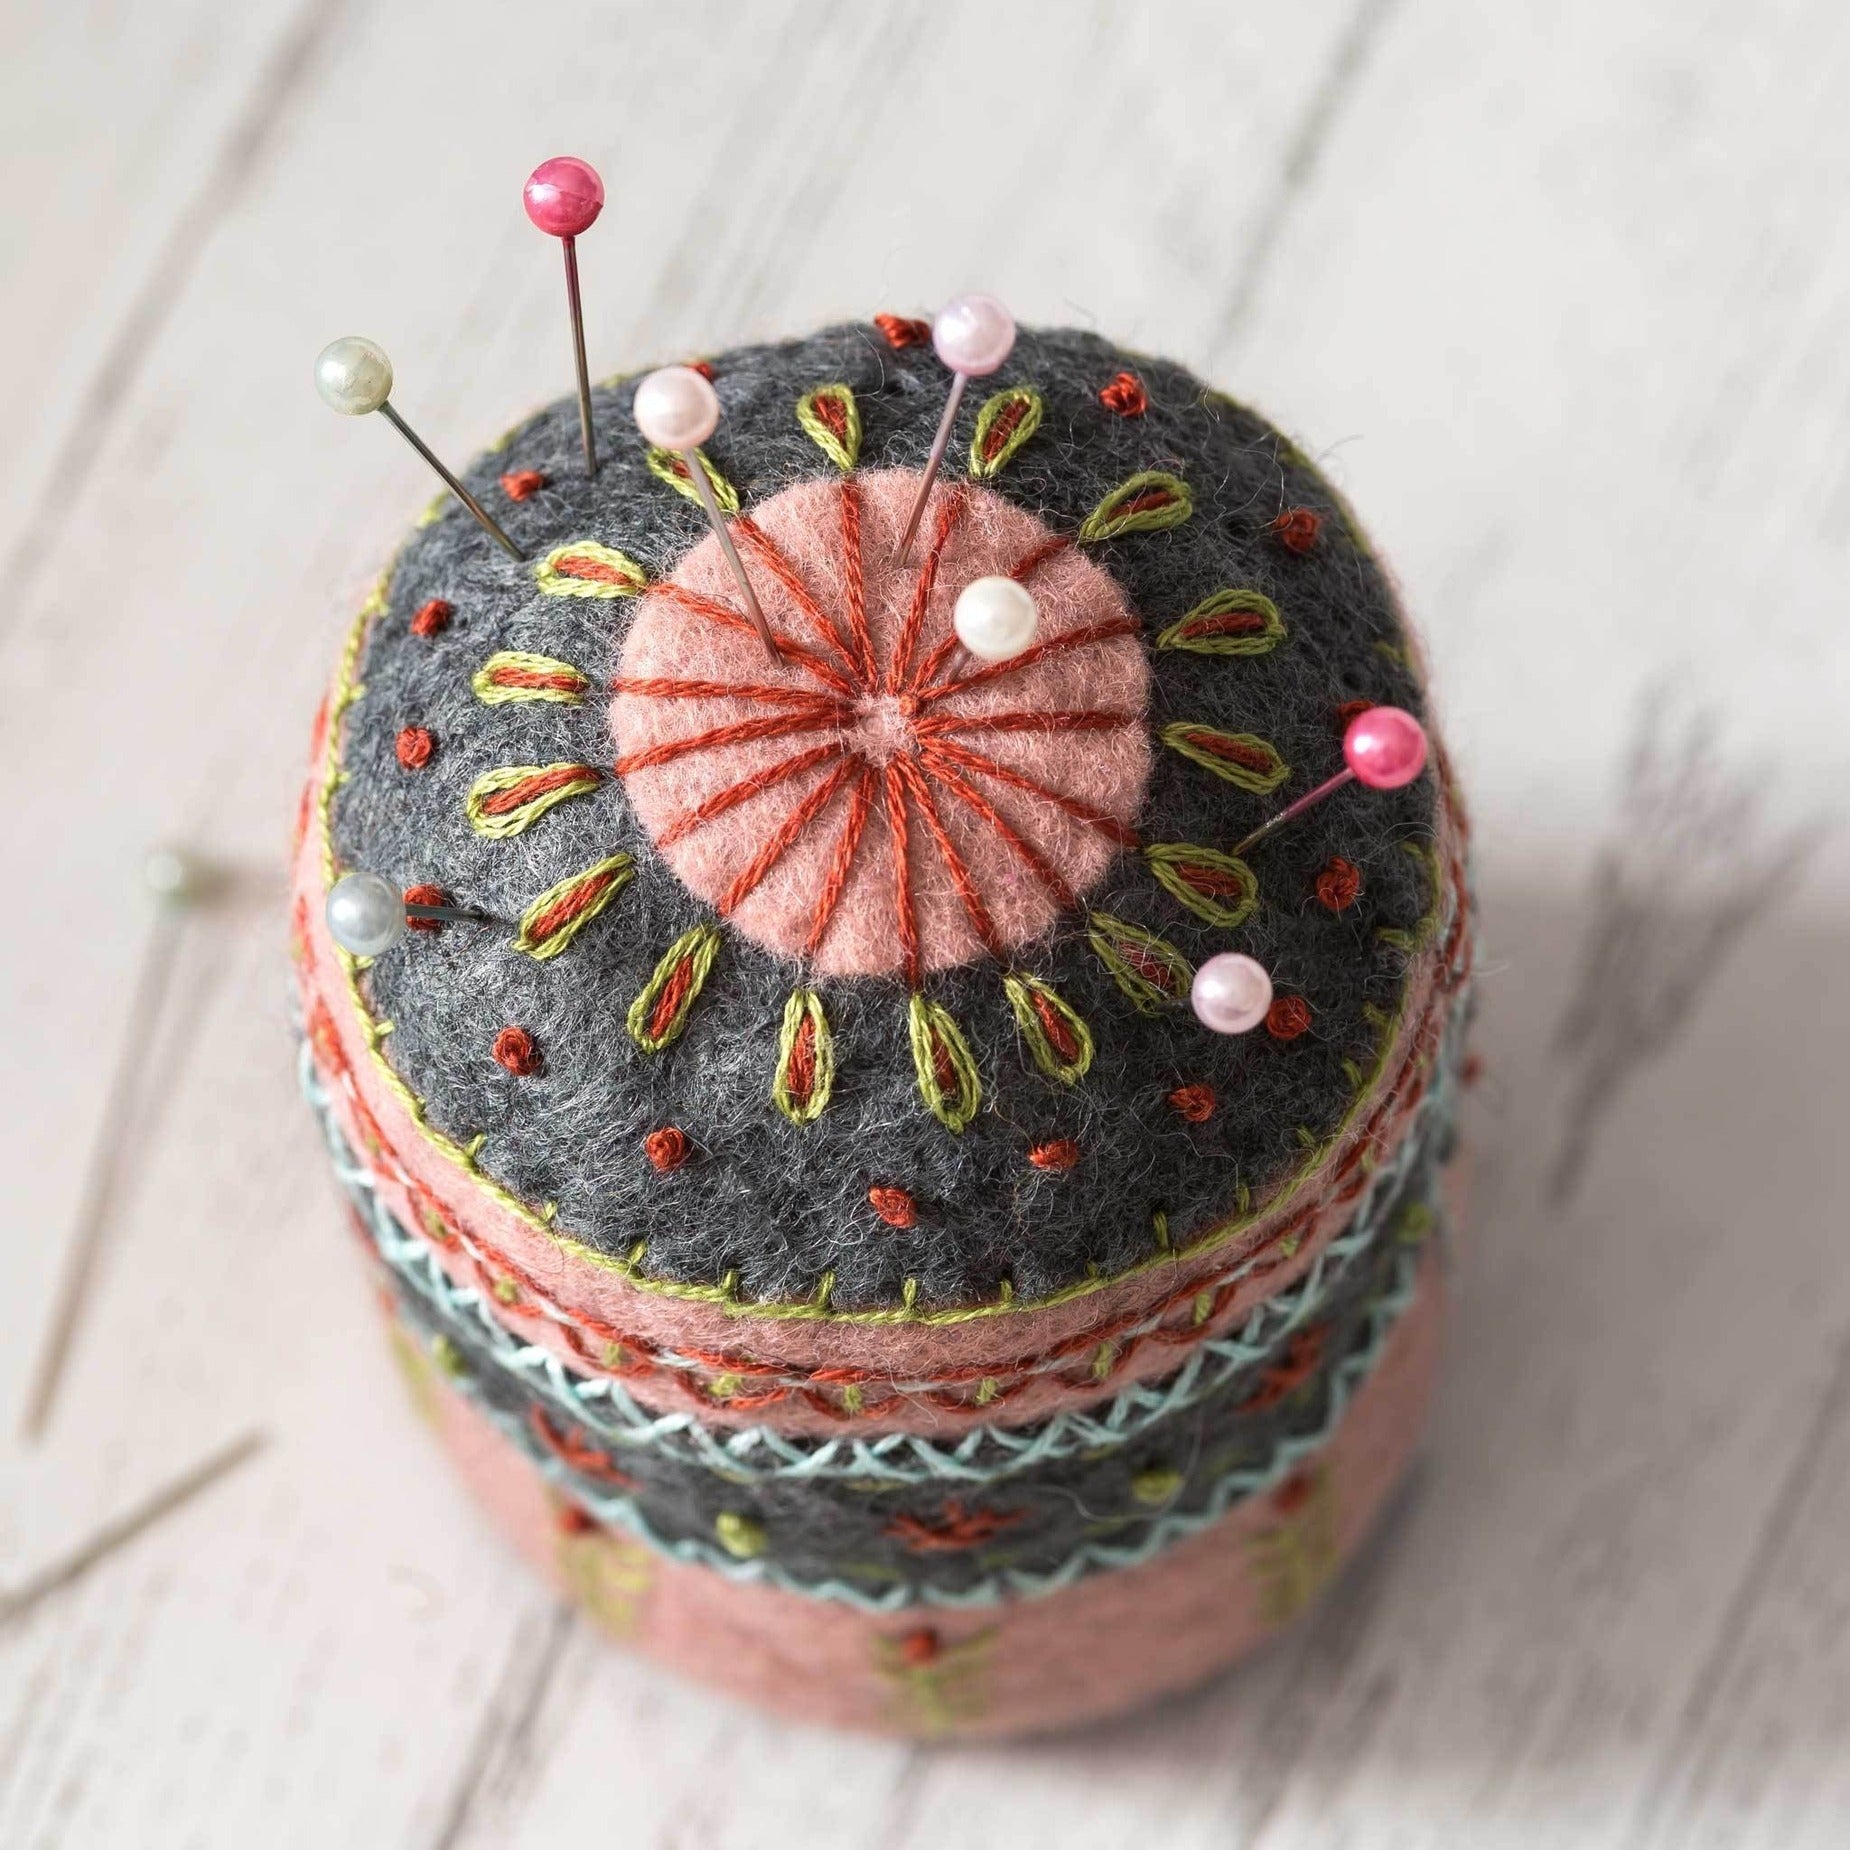 Artisanal felt pincushion with vibrant embroidery details, showcasing a coral sunburst top and colorful stitch patterns, placed on a whitewashed wooden surface.